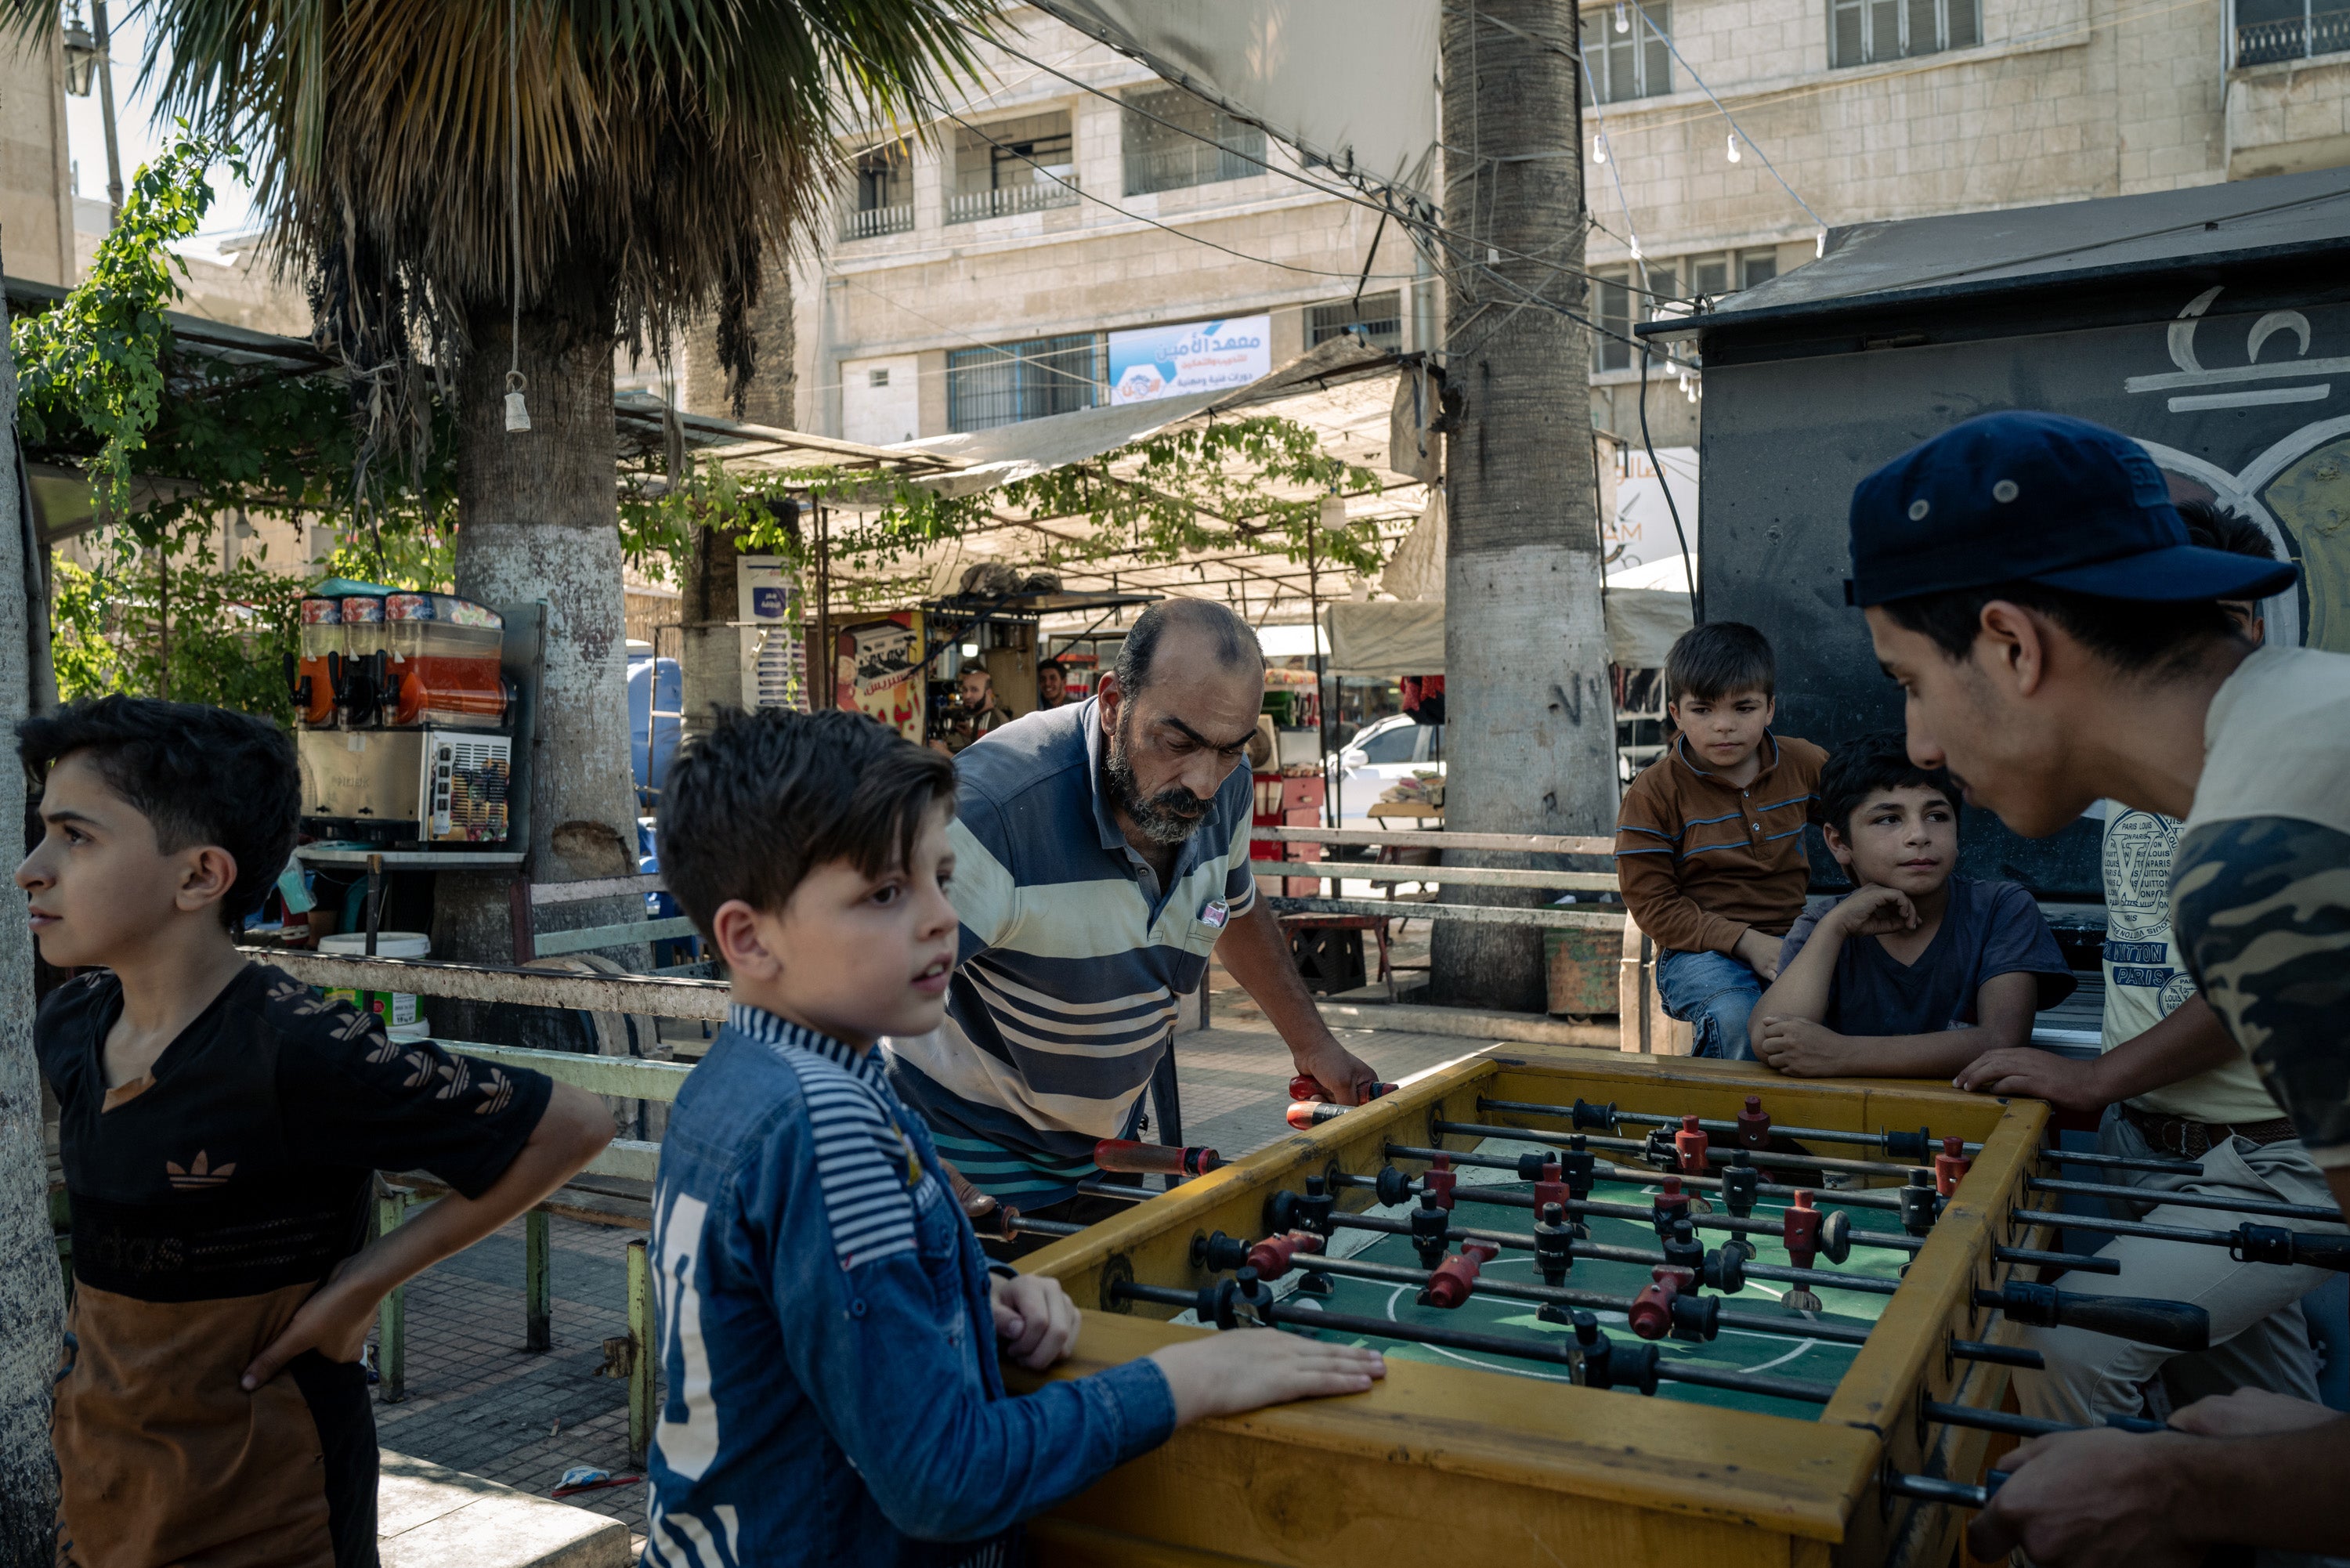 Men play table football at a square in the city of Idlib